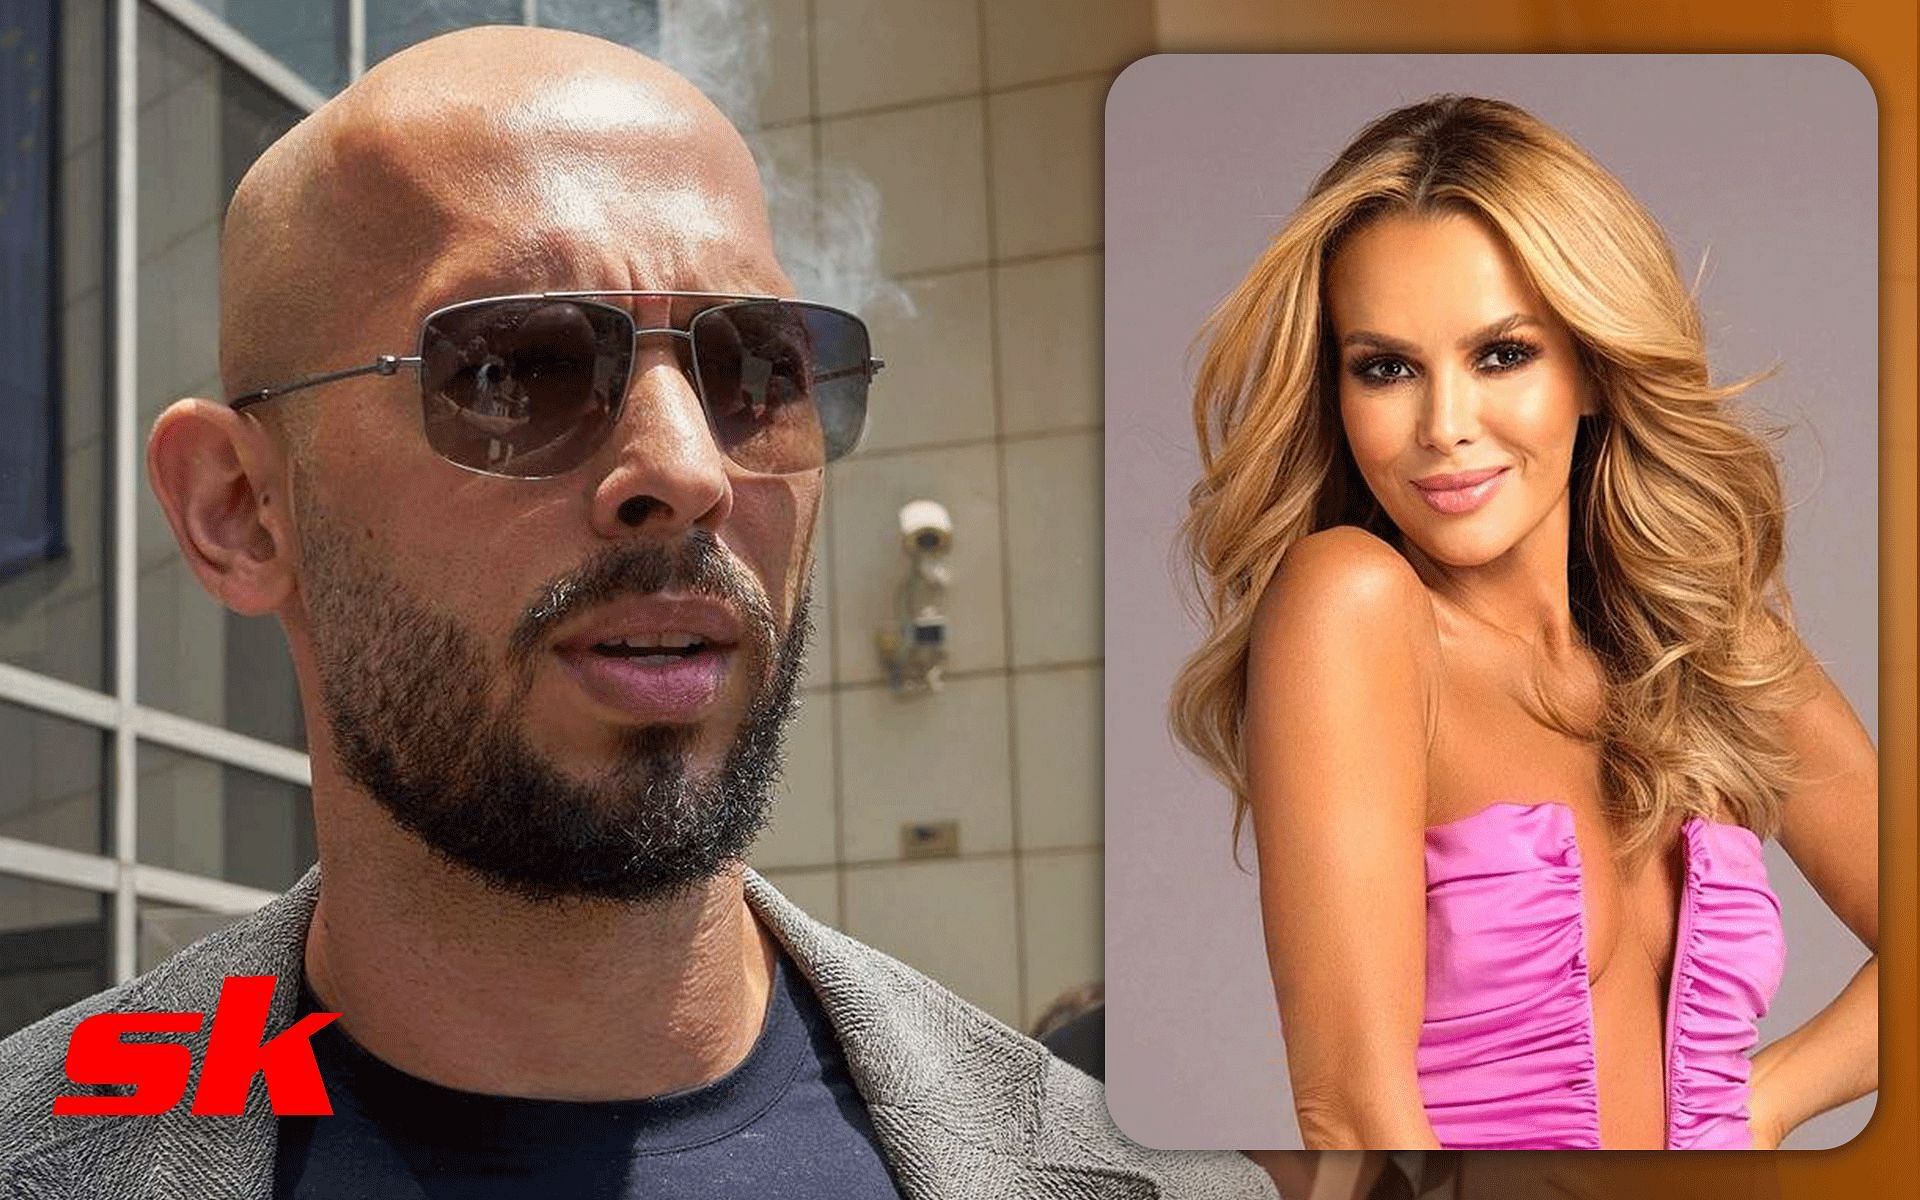 Andrew Tate (Left) and Amanda Holden (Right) [Images via: @HU_TheRealWorld on Twitter and @noholdenback on Instagram]